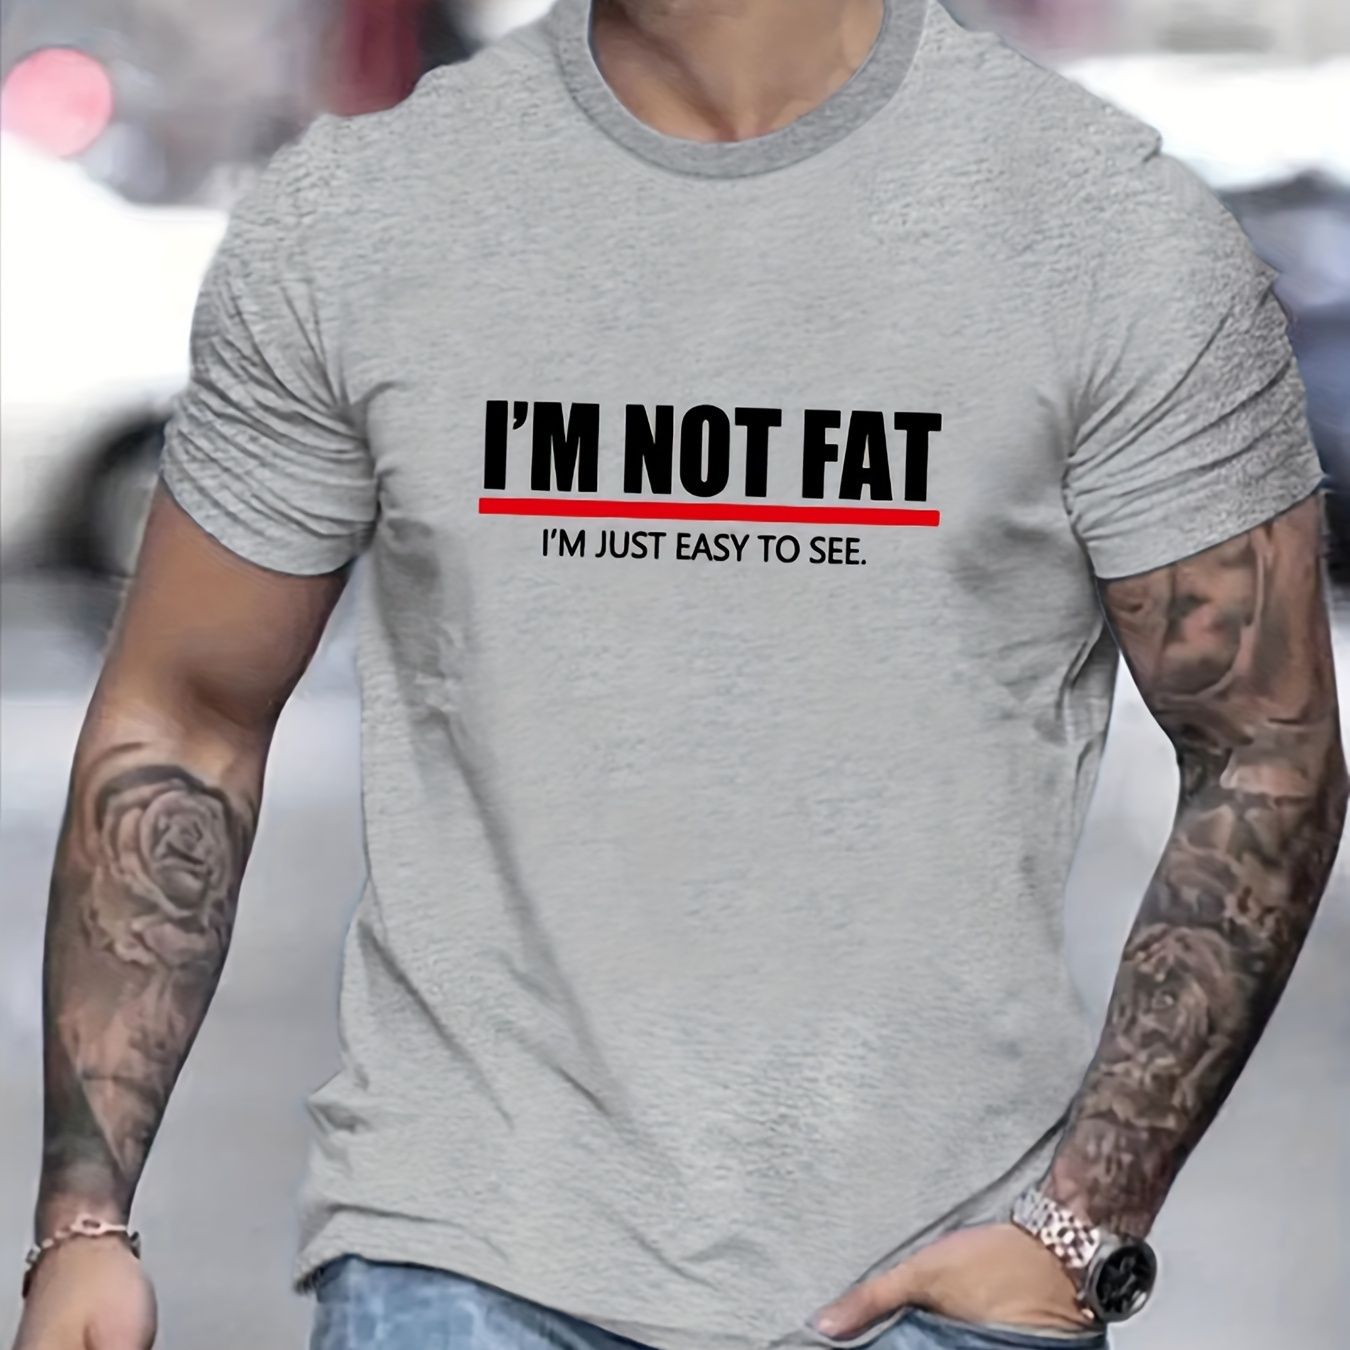 

I'm Not Fat I'm Just Easy To See Print, Men's Novel Graphic Design T-shirt, Casual Comfy Tees For Summer, Men's Clothing Tops For Daily Activities